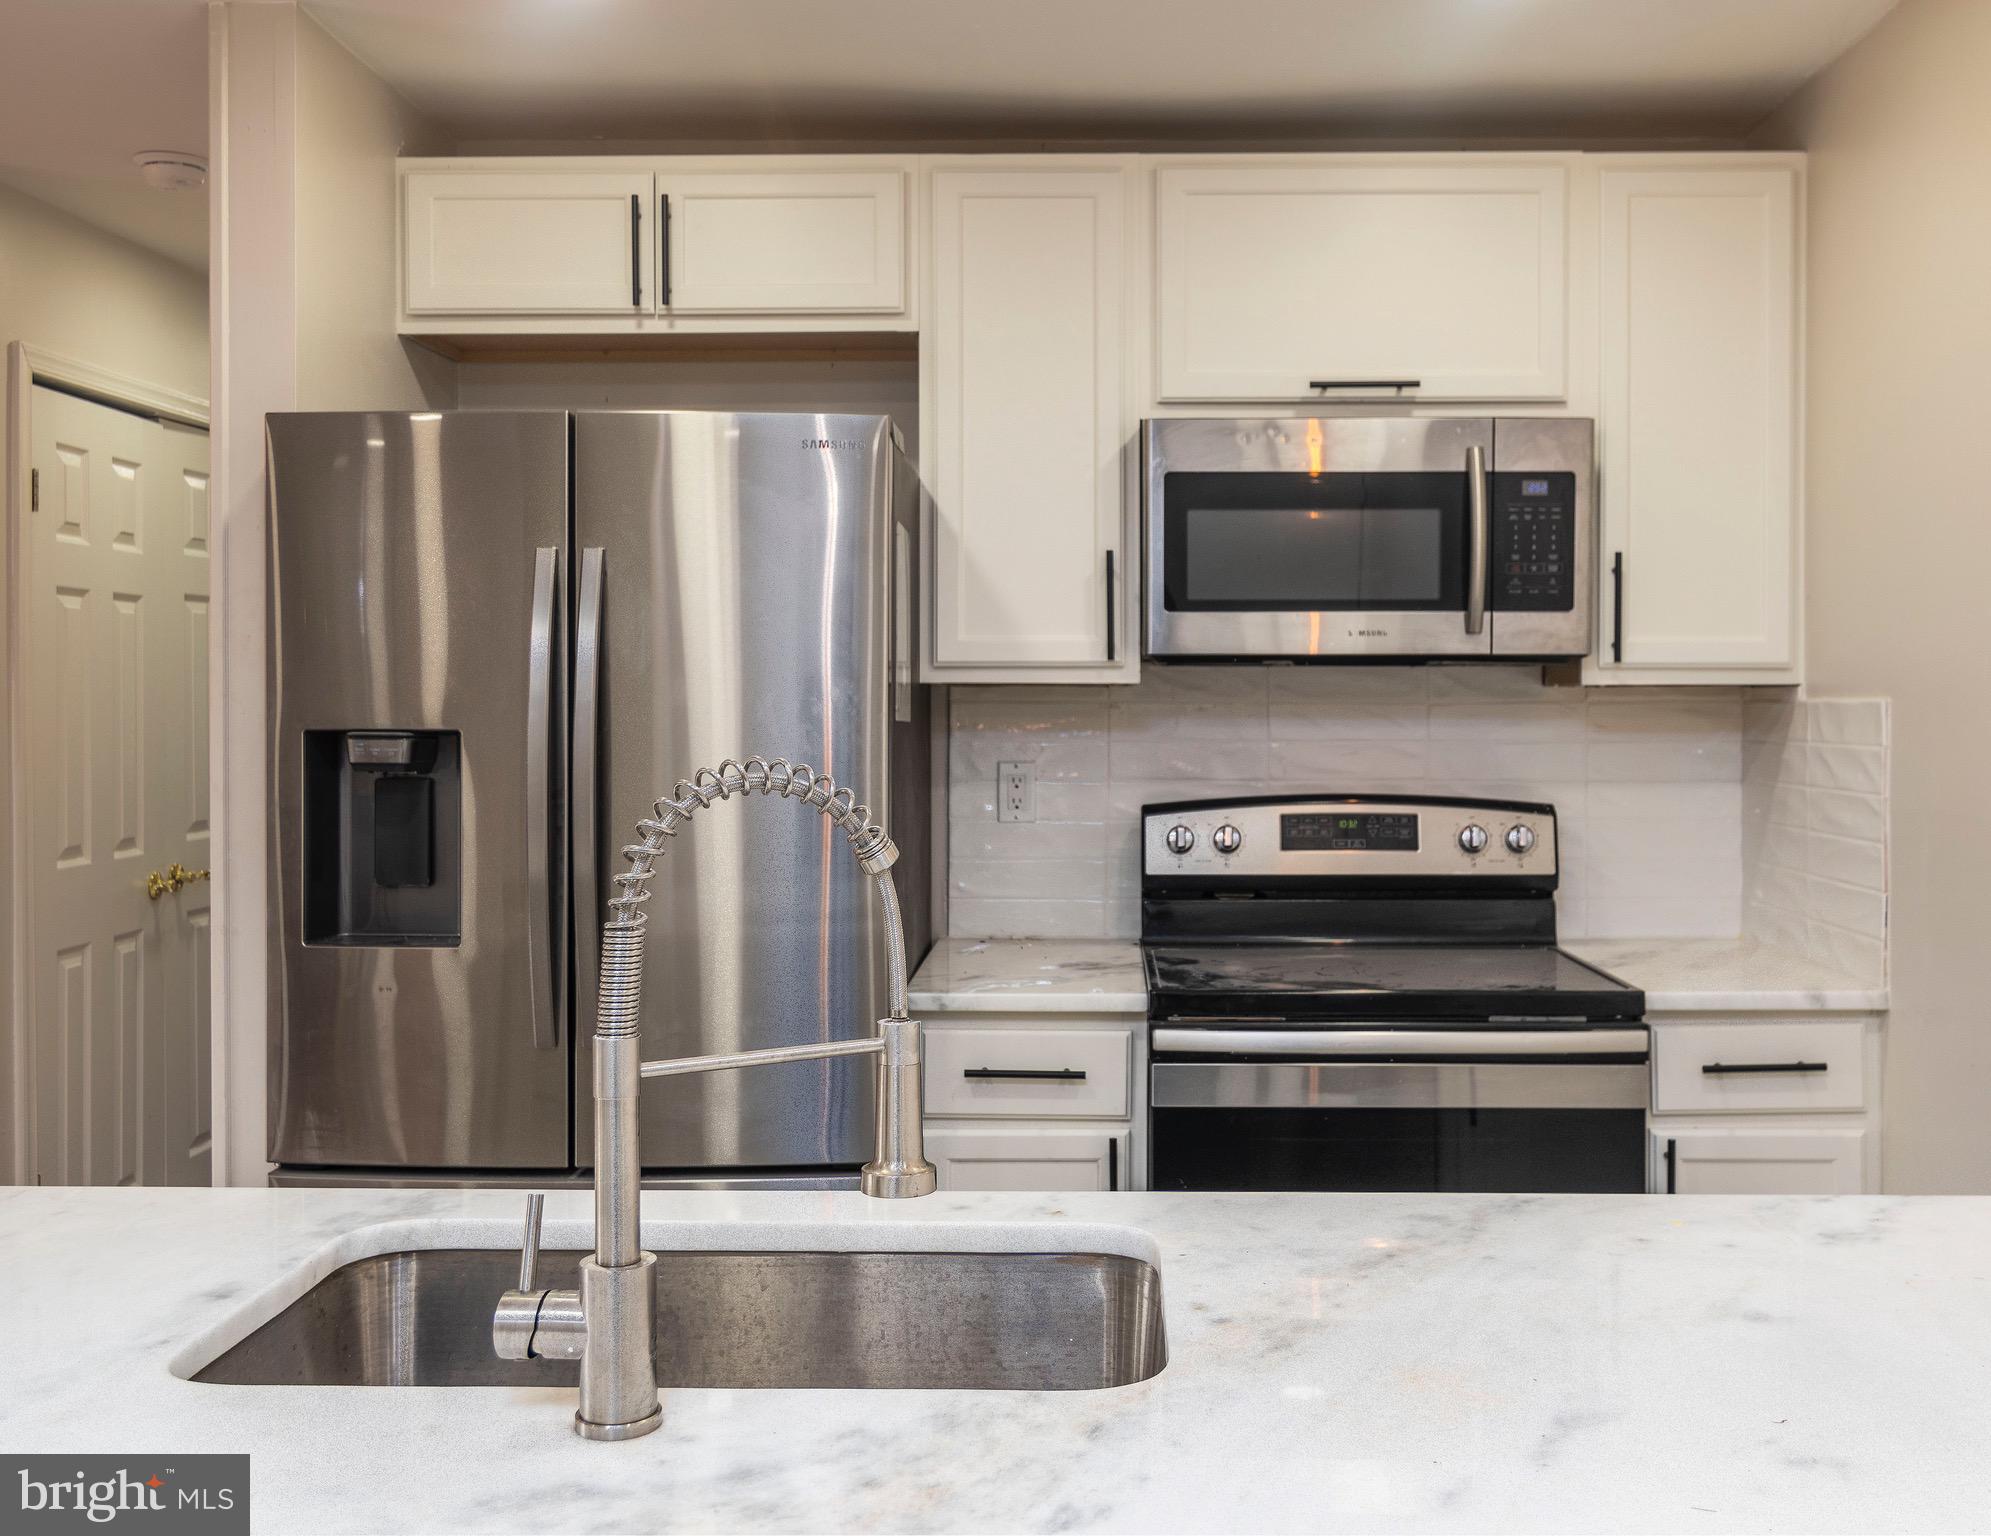 a kitchen with stainless steel appliances a stove a microwave and refrigerator